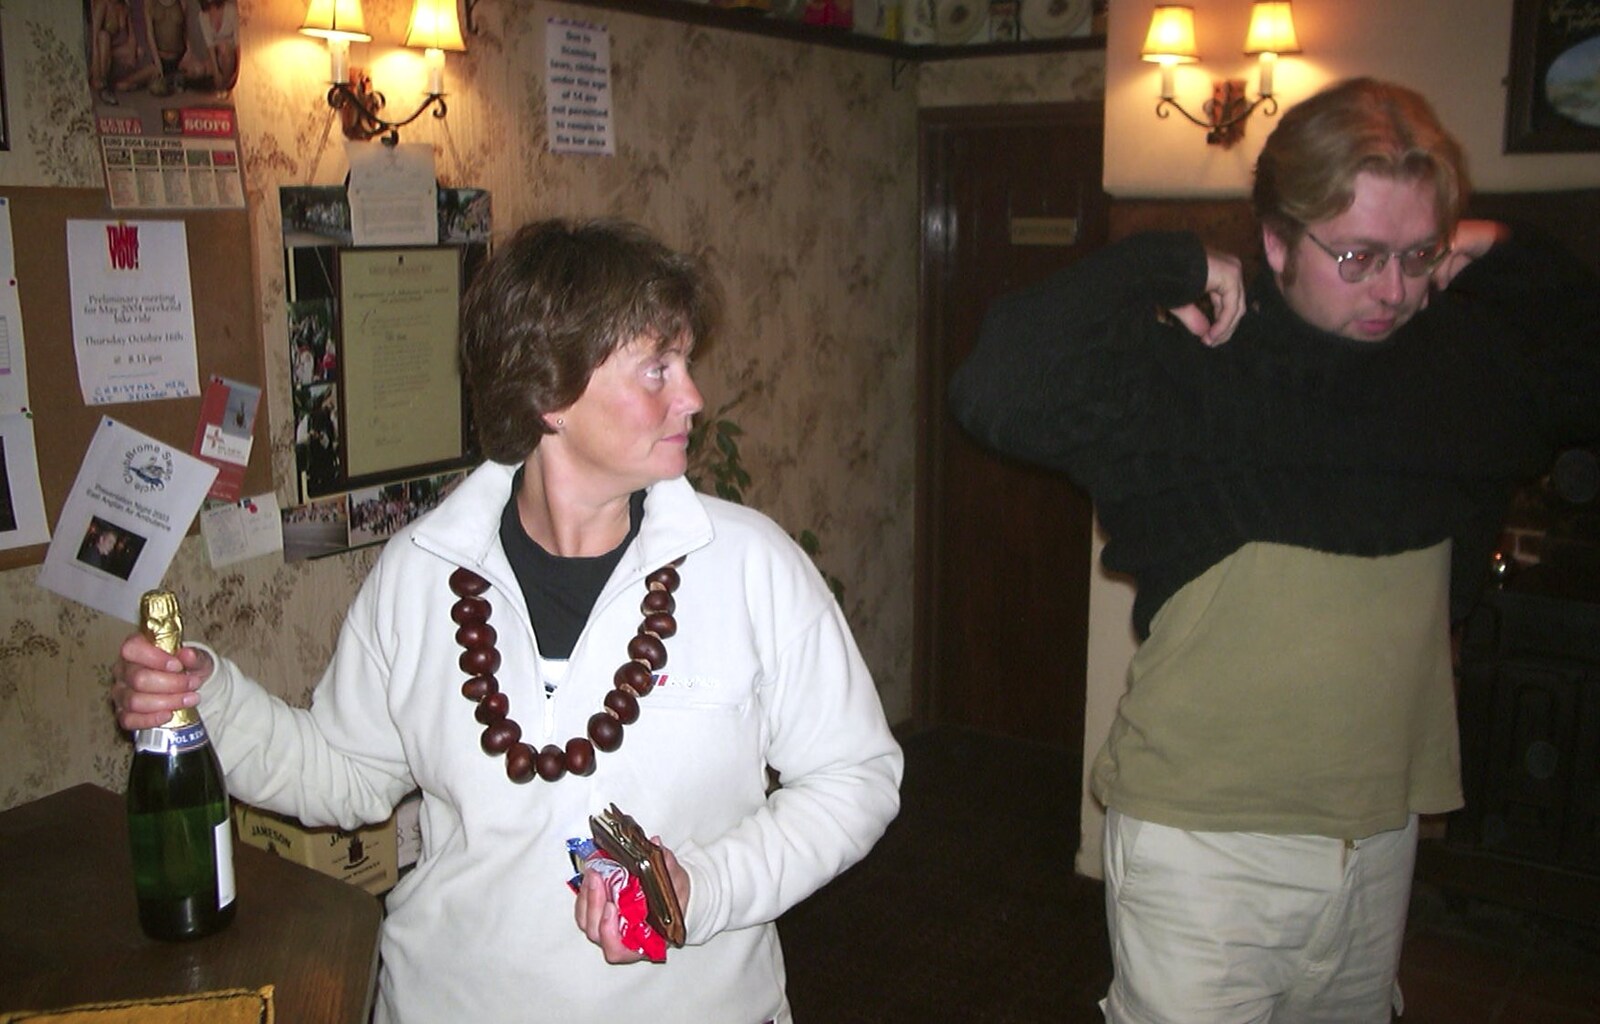 The victorious Pippa from Dunston Hall and Conker Night at the Brome Swan, Suffolk and Norfolk - 5th October 2003